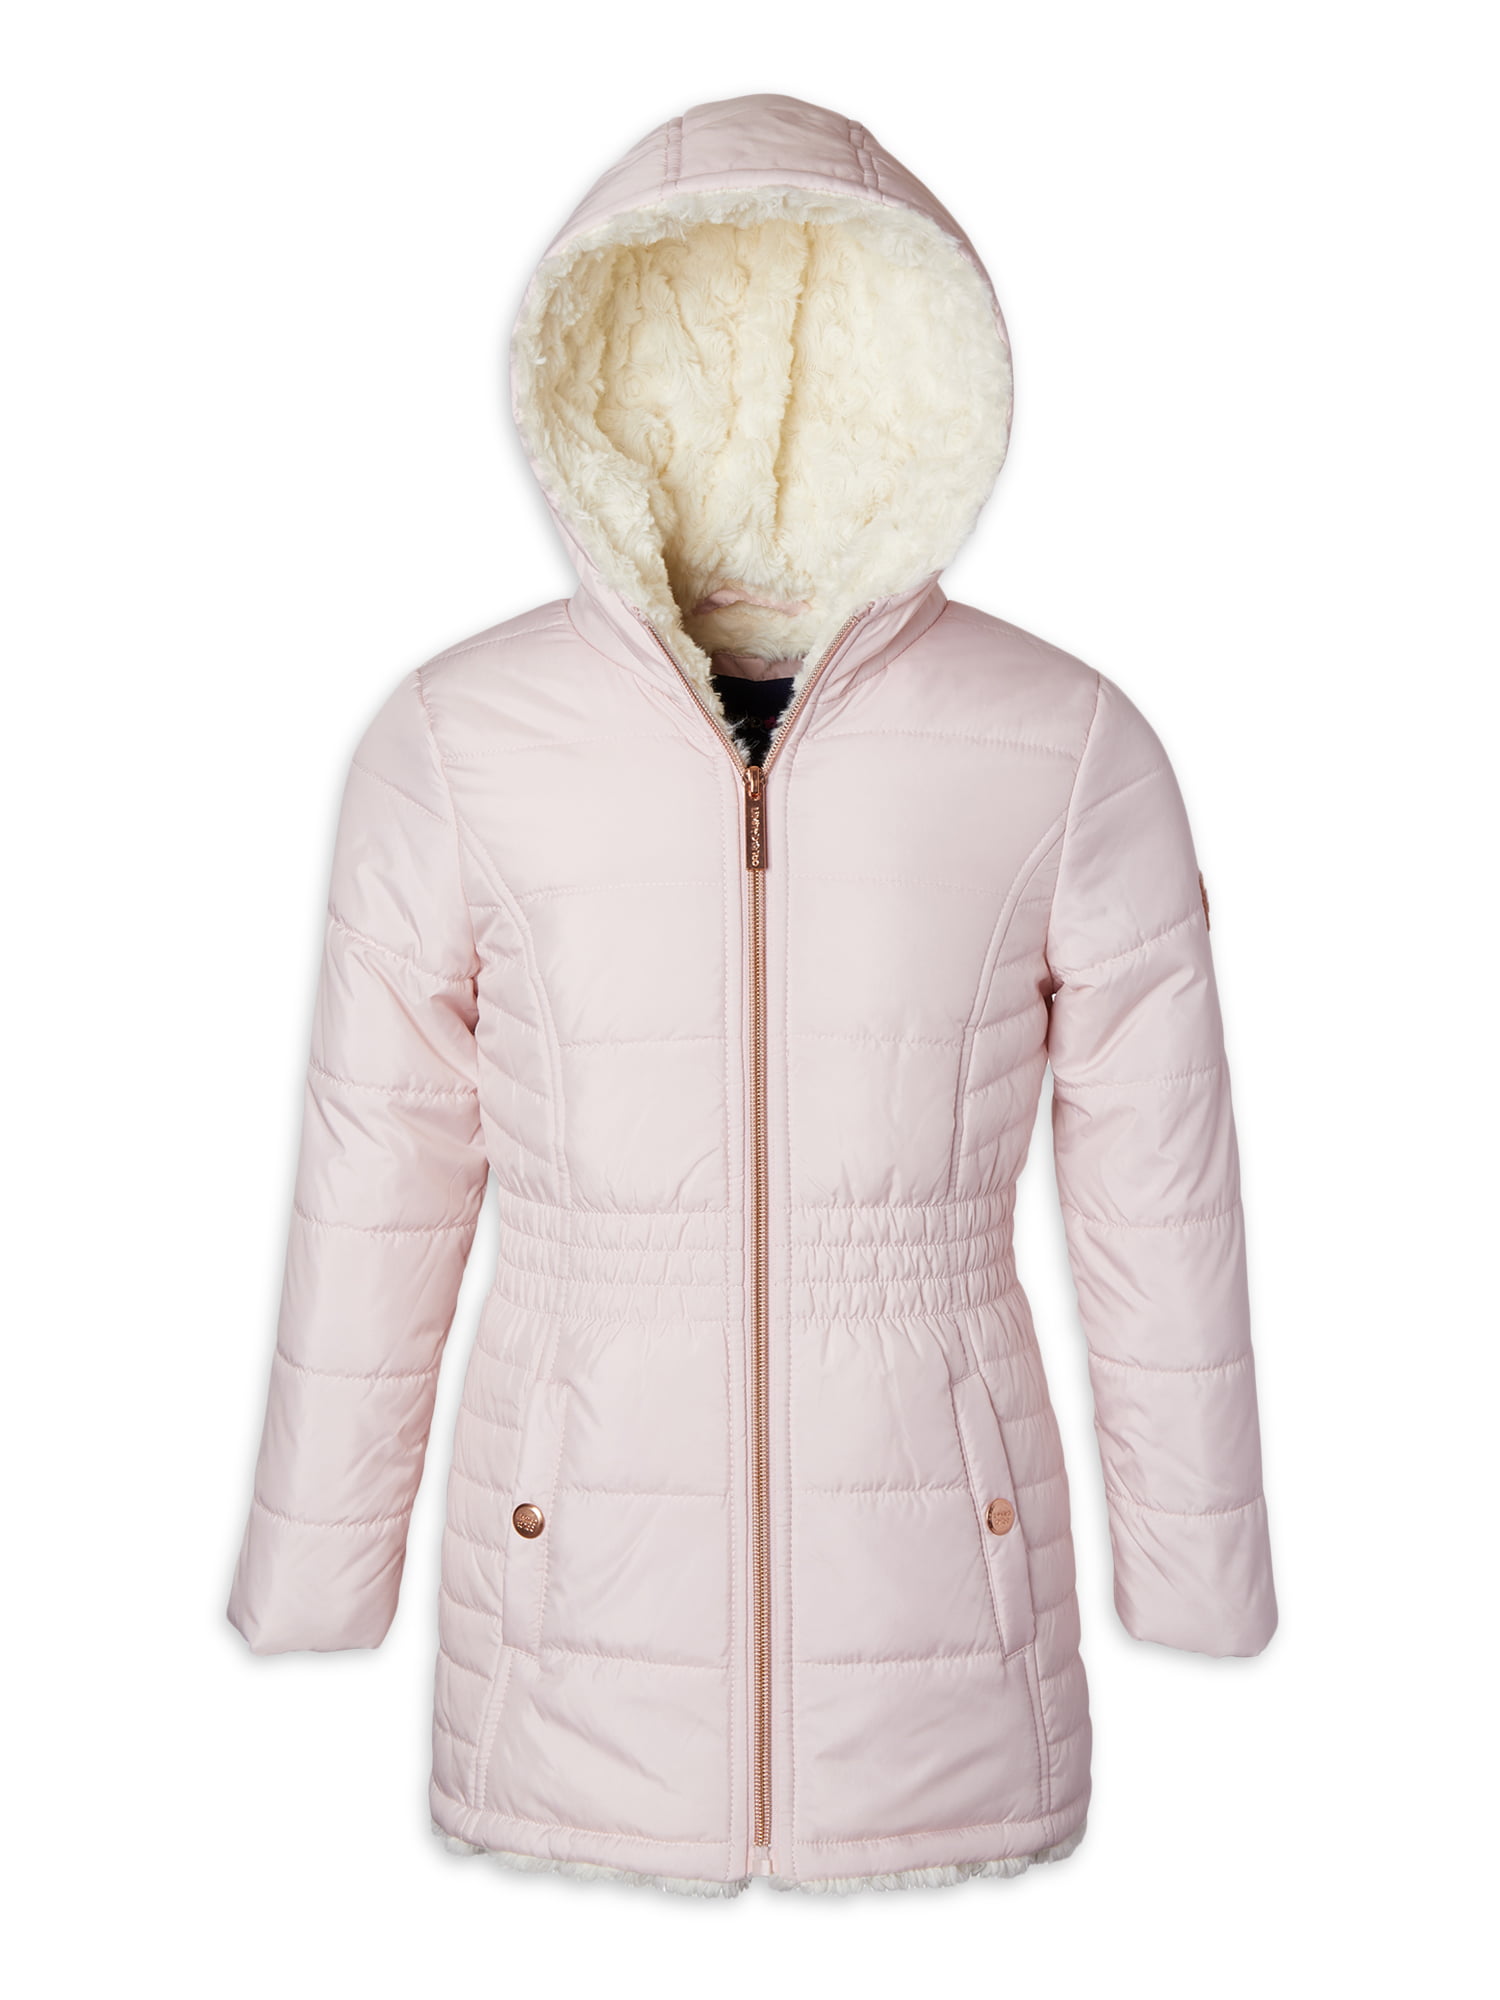 Limited Too Girls Mid Length Packable Jacket